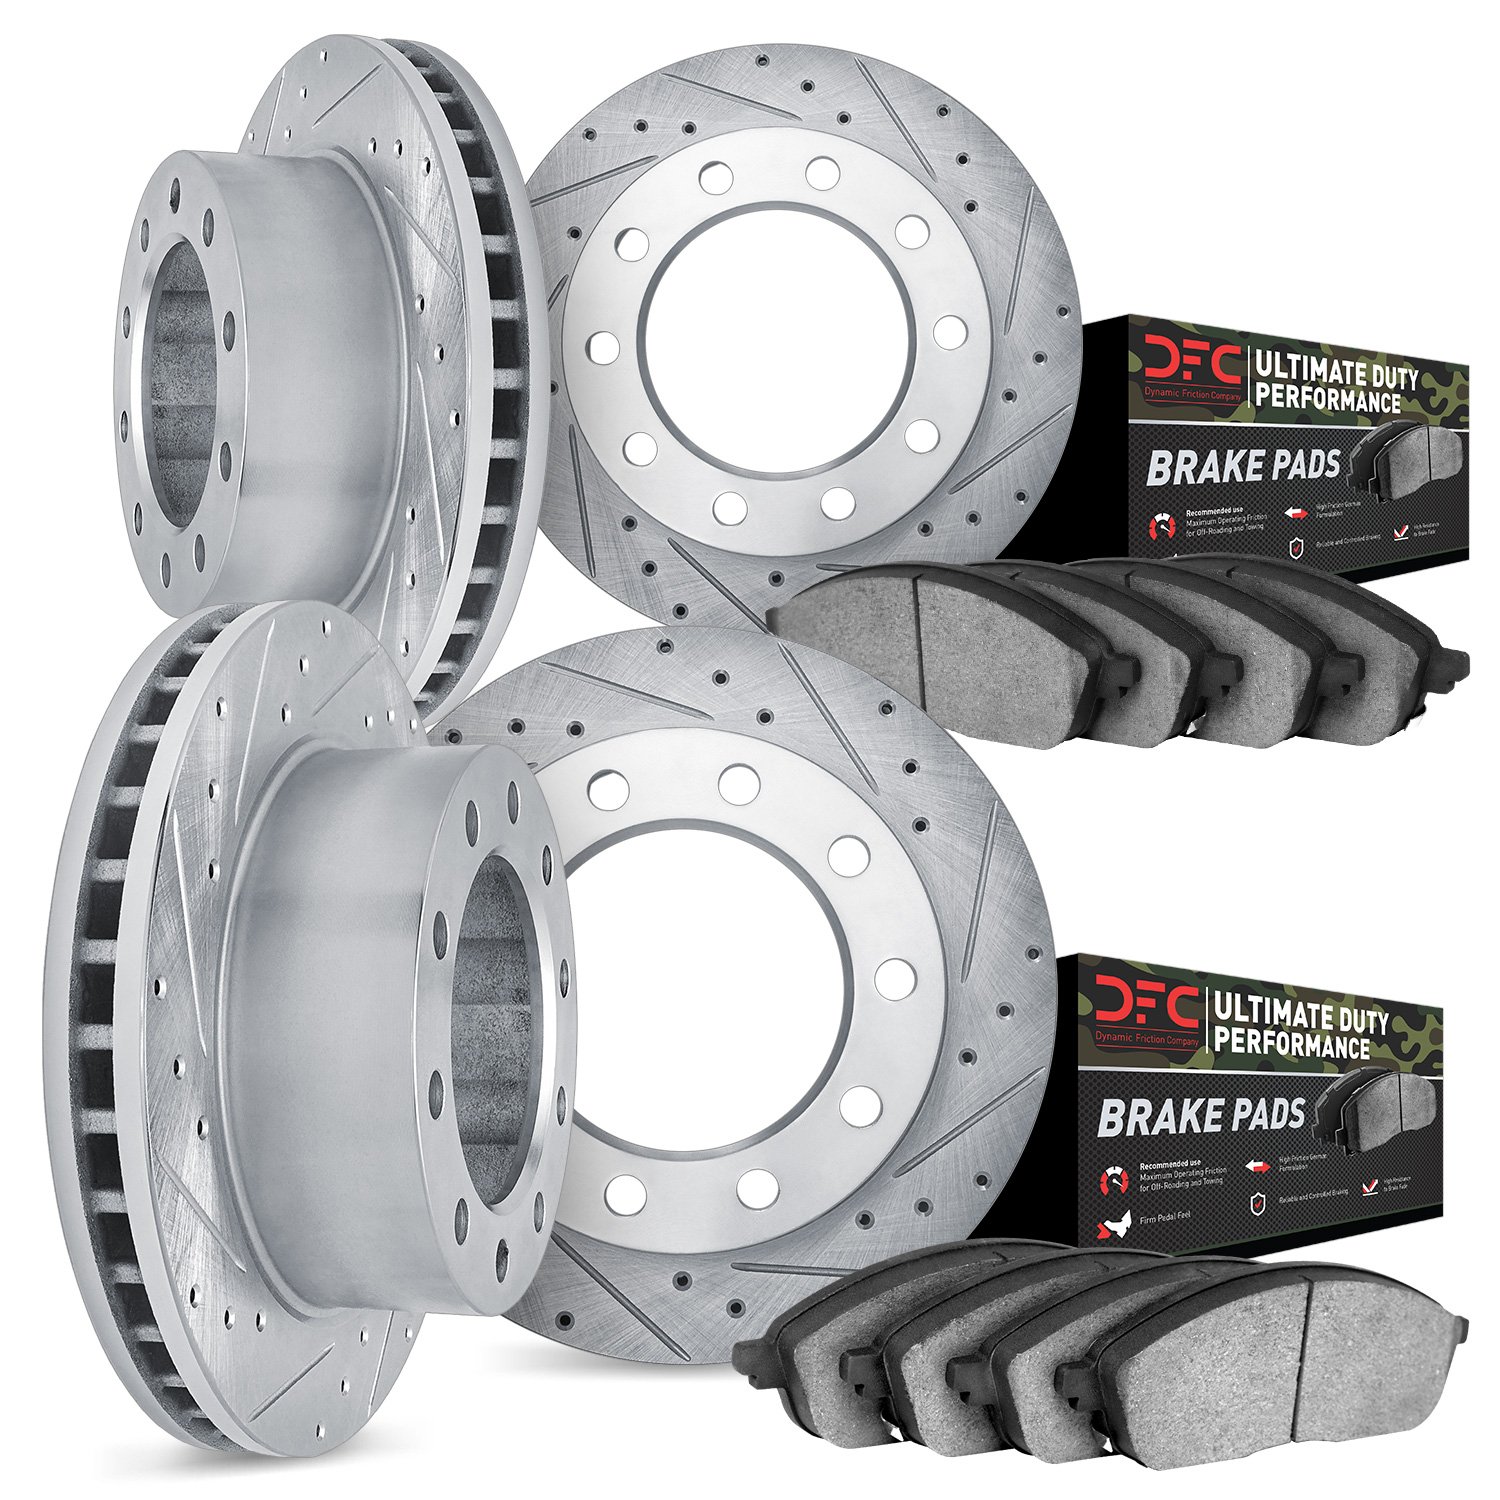 7404-54014 Drilled/Slotted Brake Rotors with Ultimate-Duty Brake Pads Kit [Silver], 1999-2004 Ford/Lincoln/Mercury/Mazda, Positi